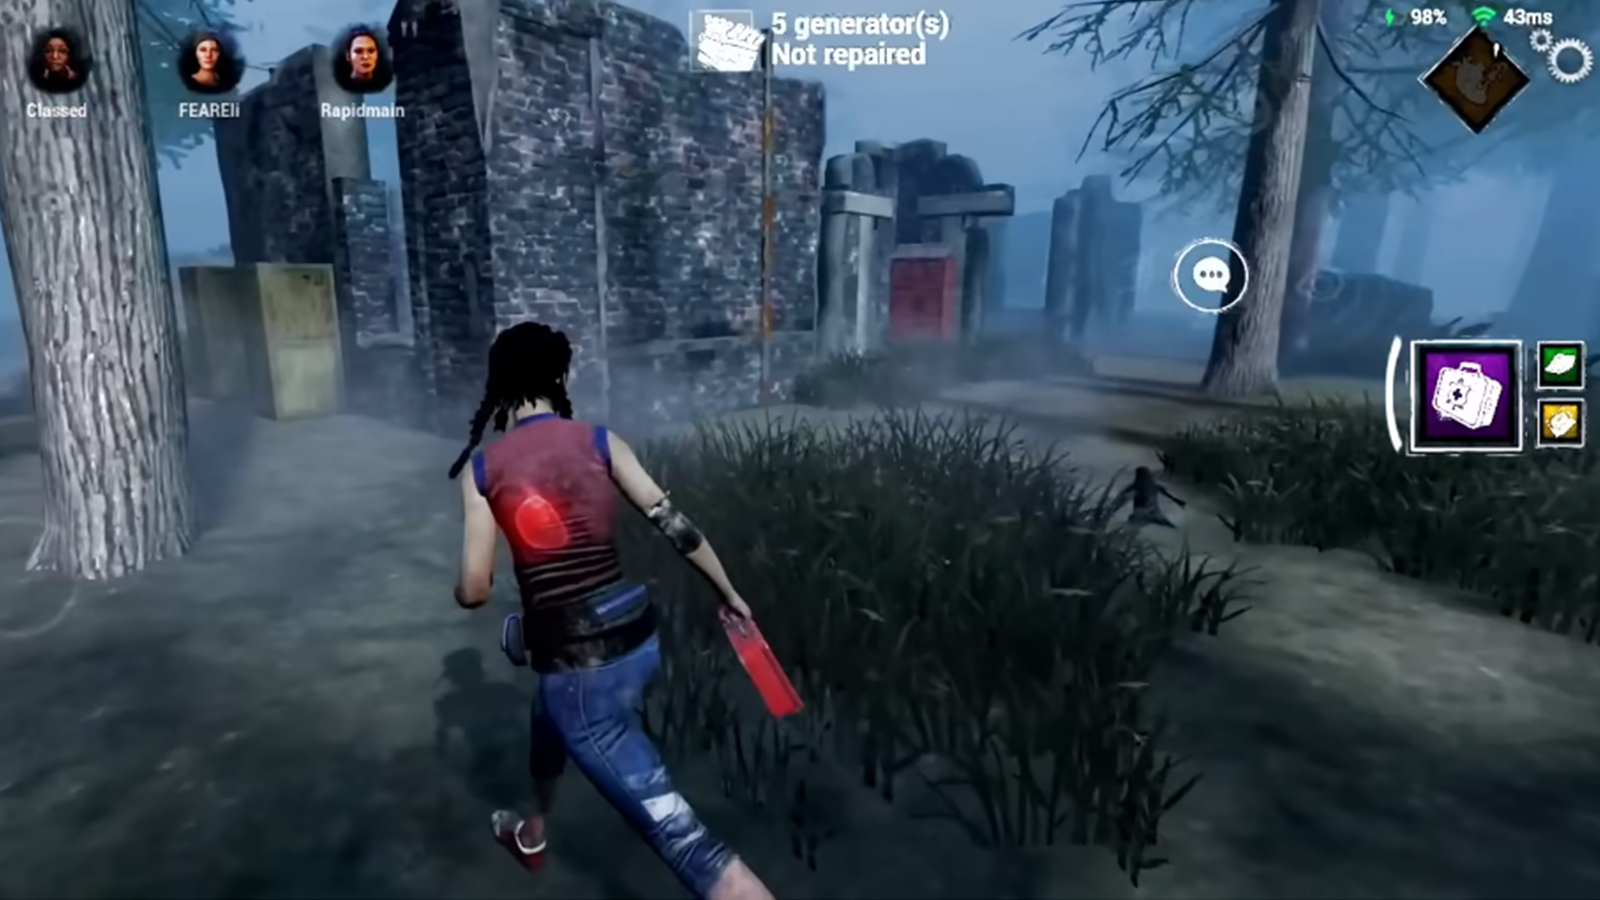 Screenshot 1 of Dead By Daylight Scary Evil 5